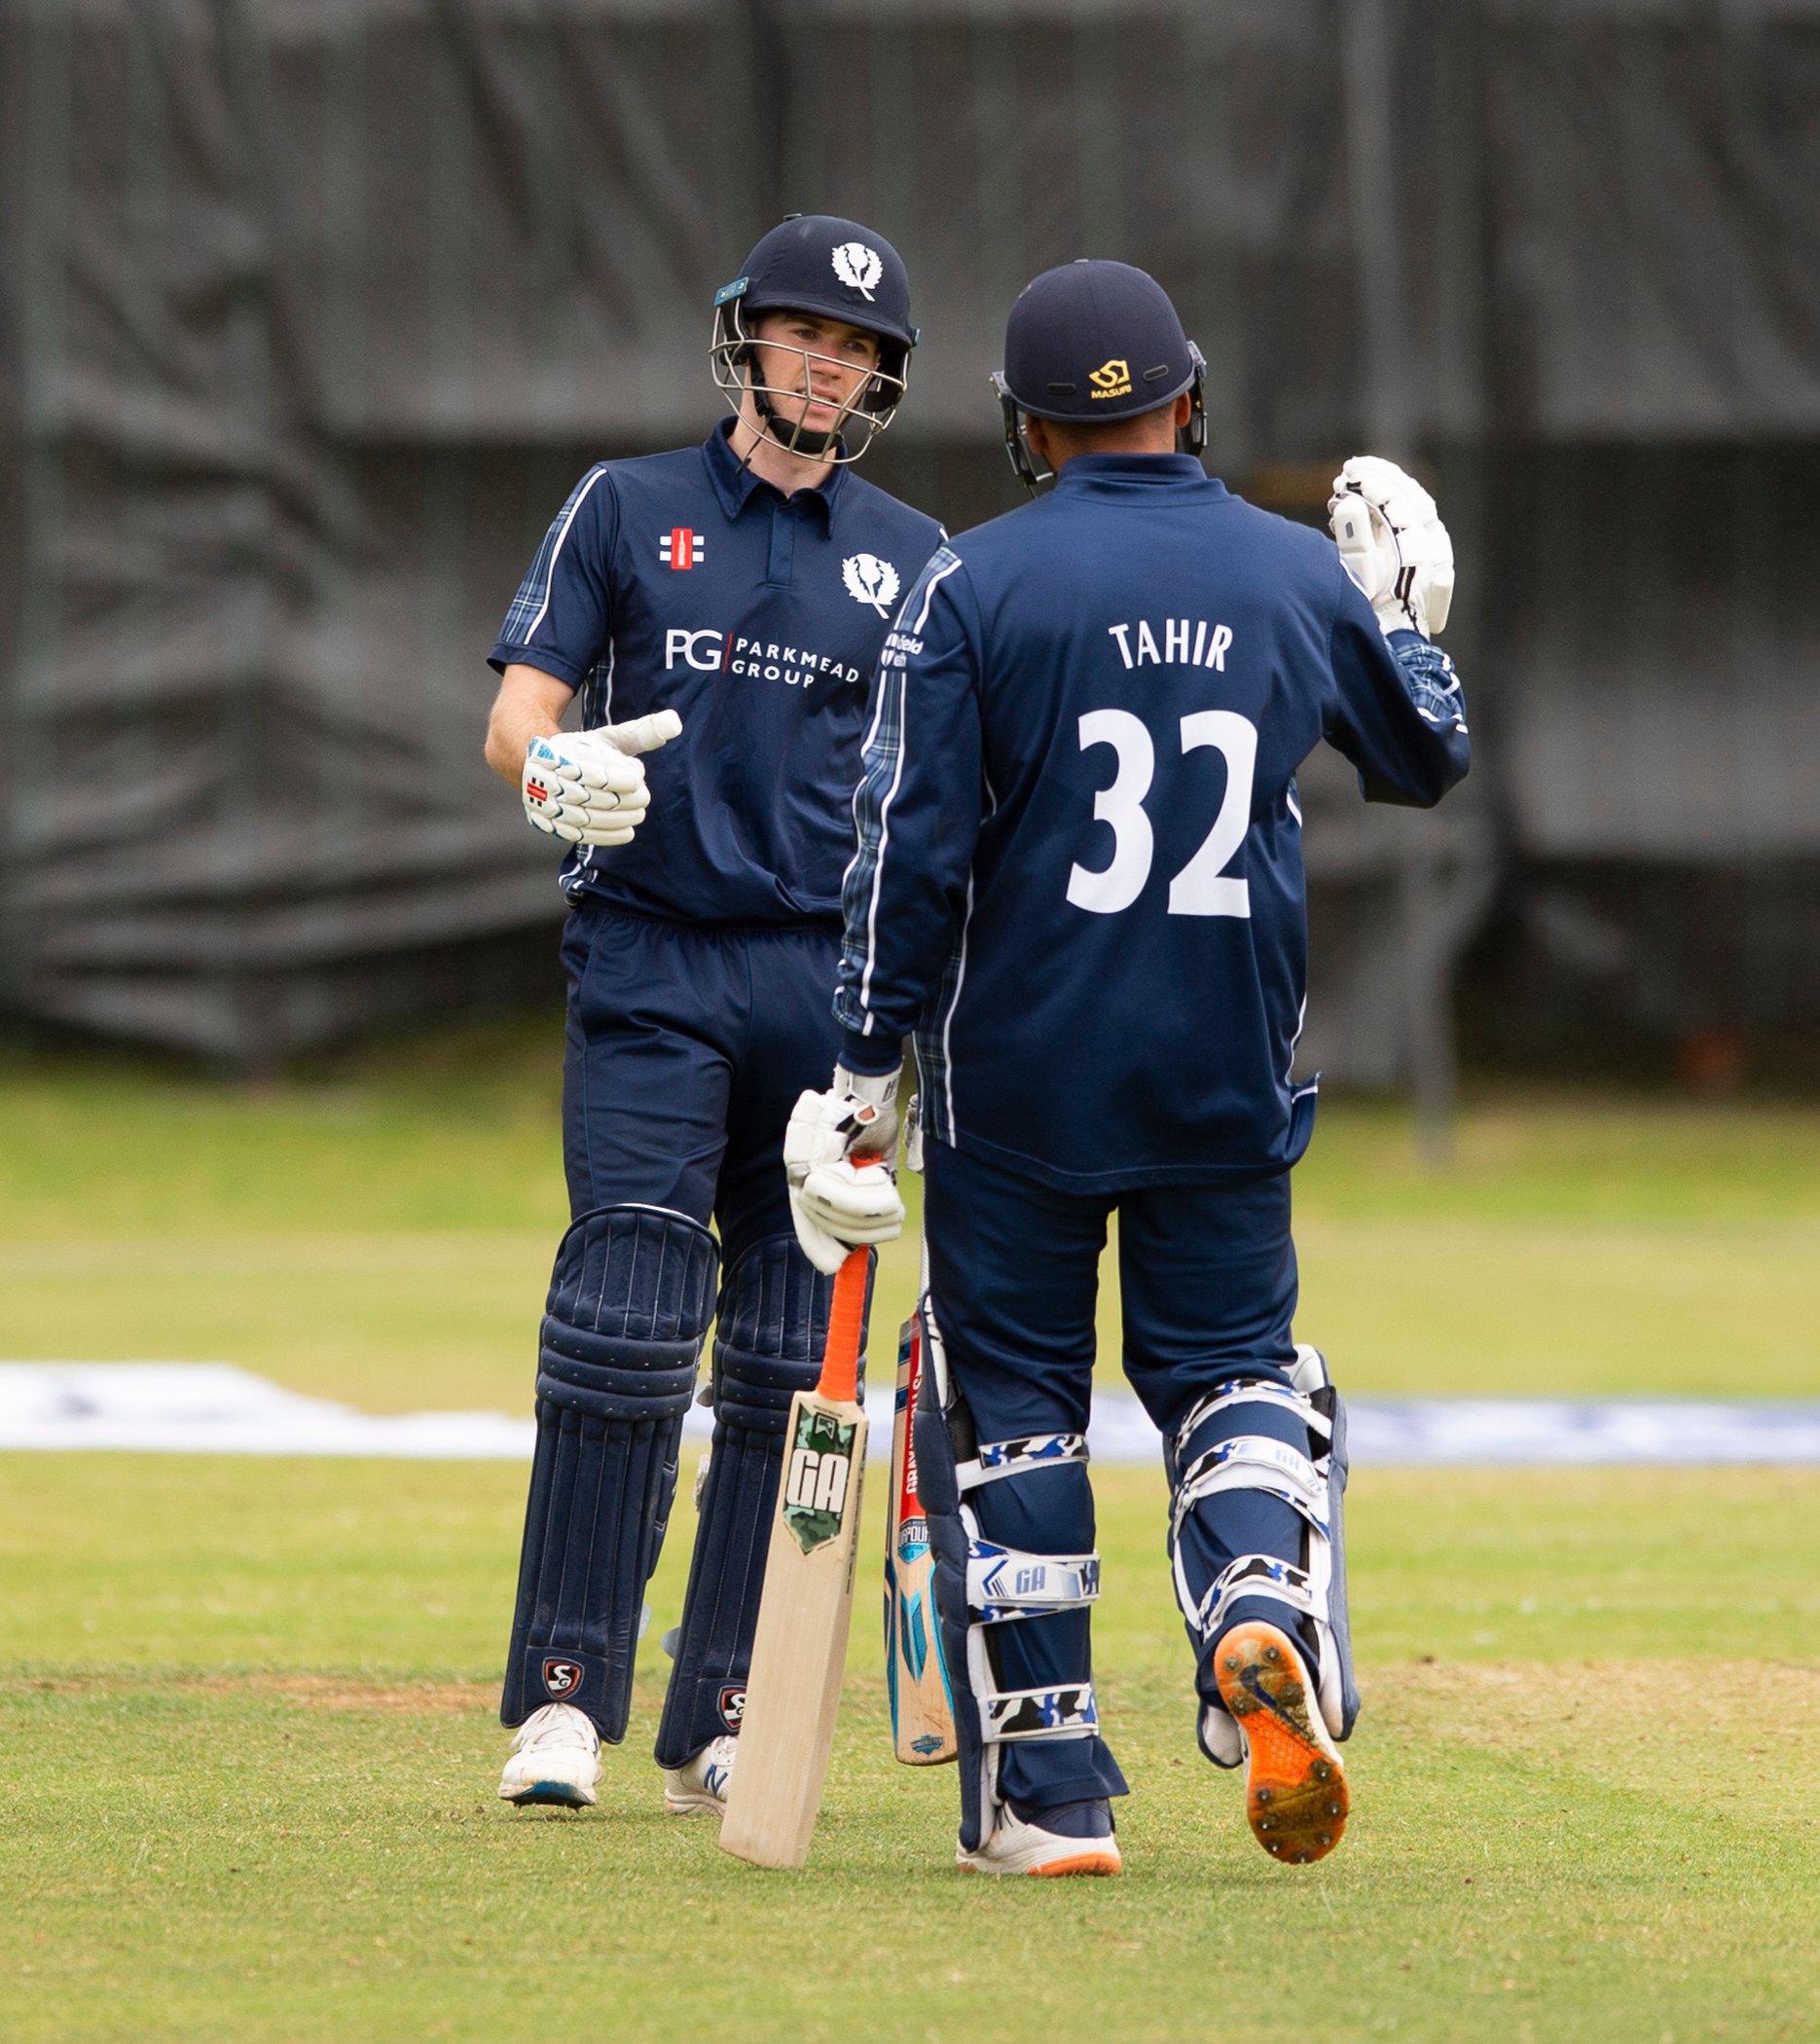 Nepal Record their First Win versus Scotland